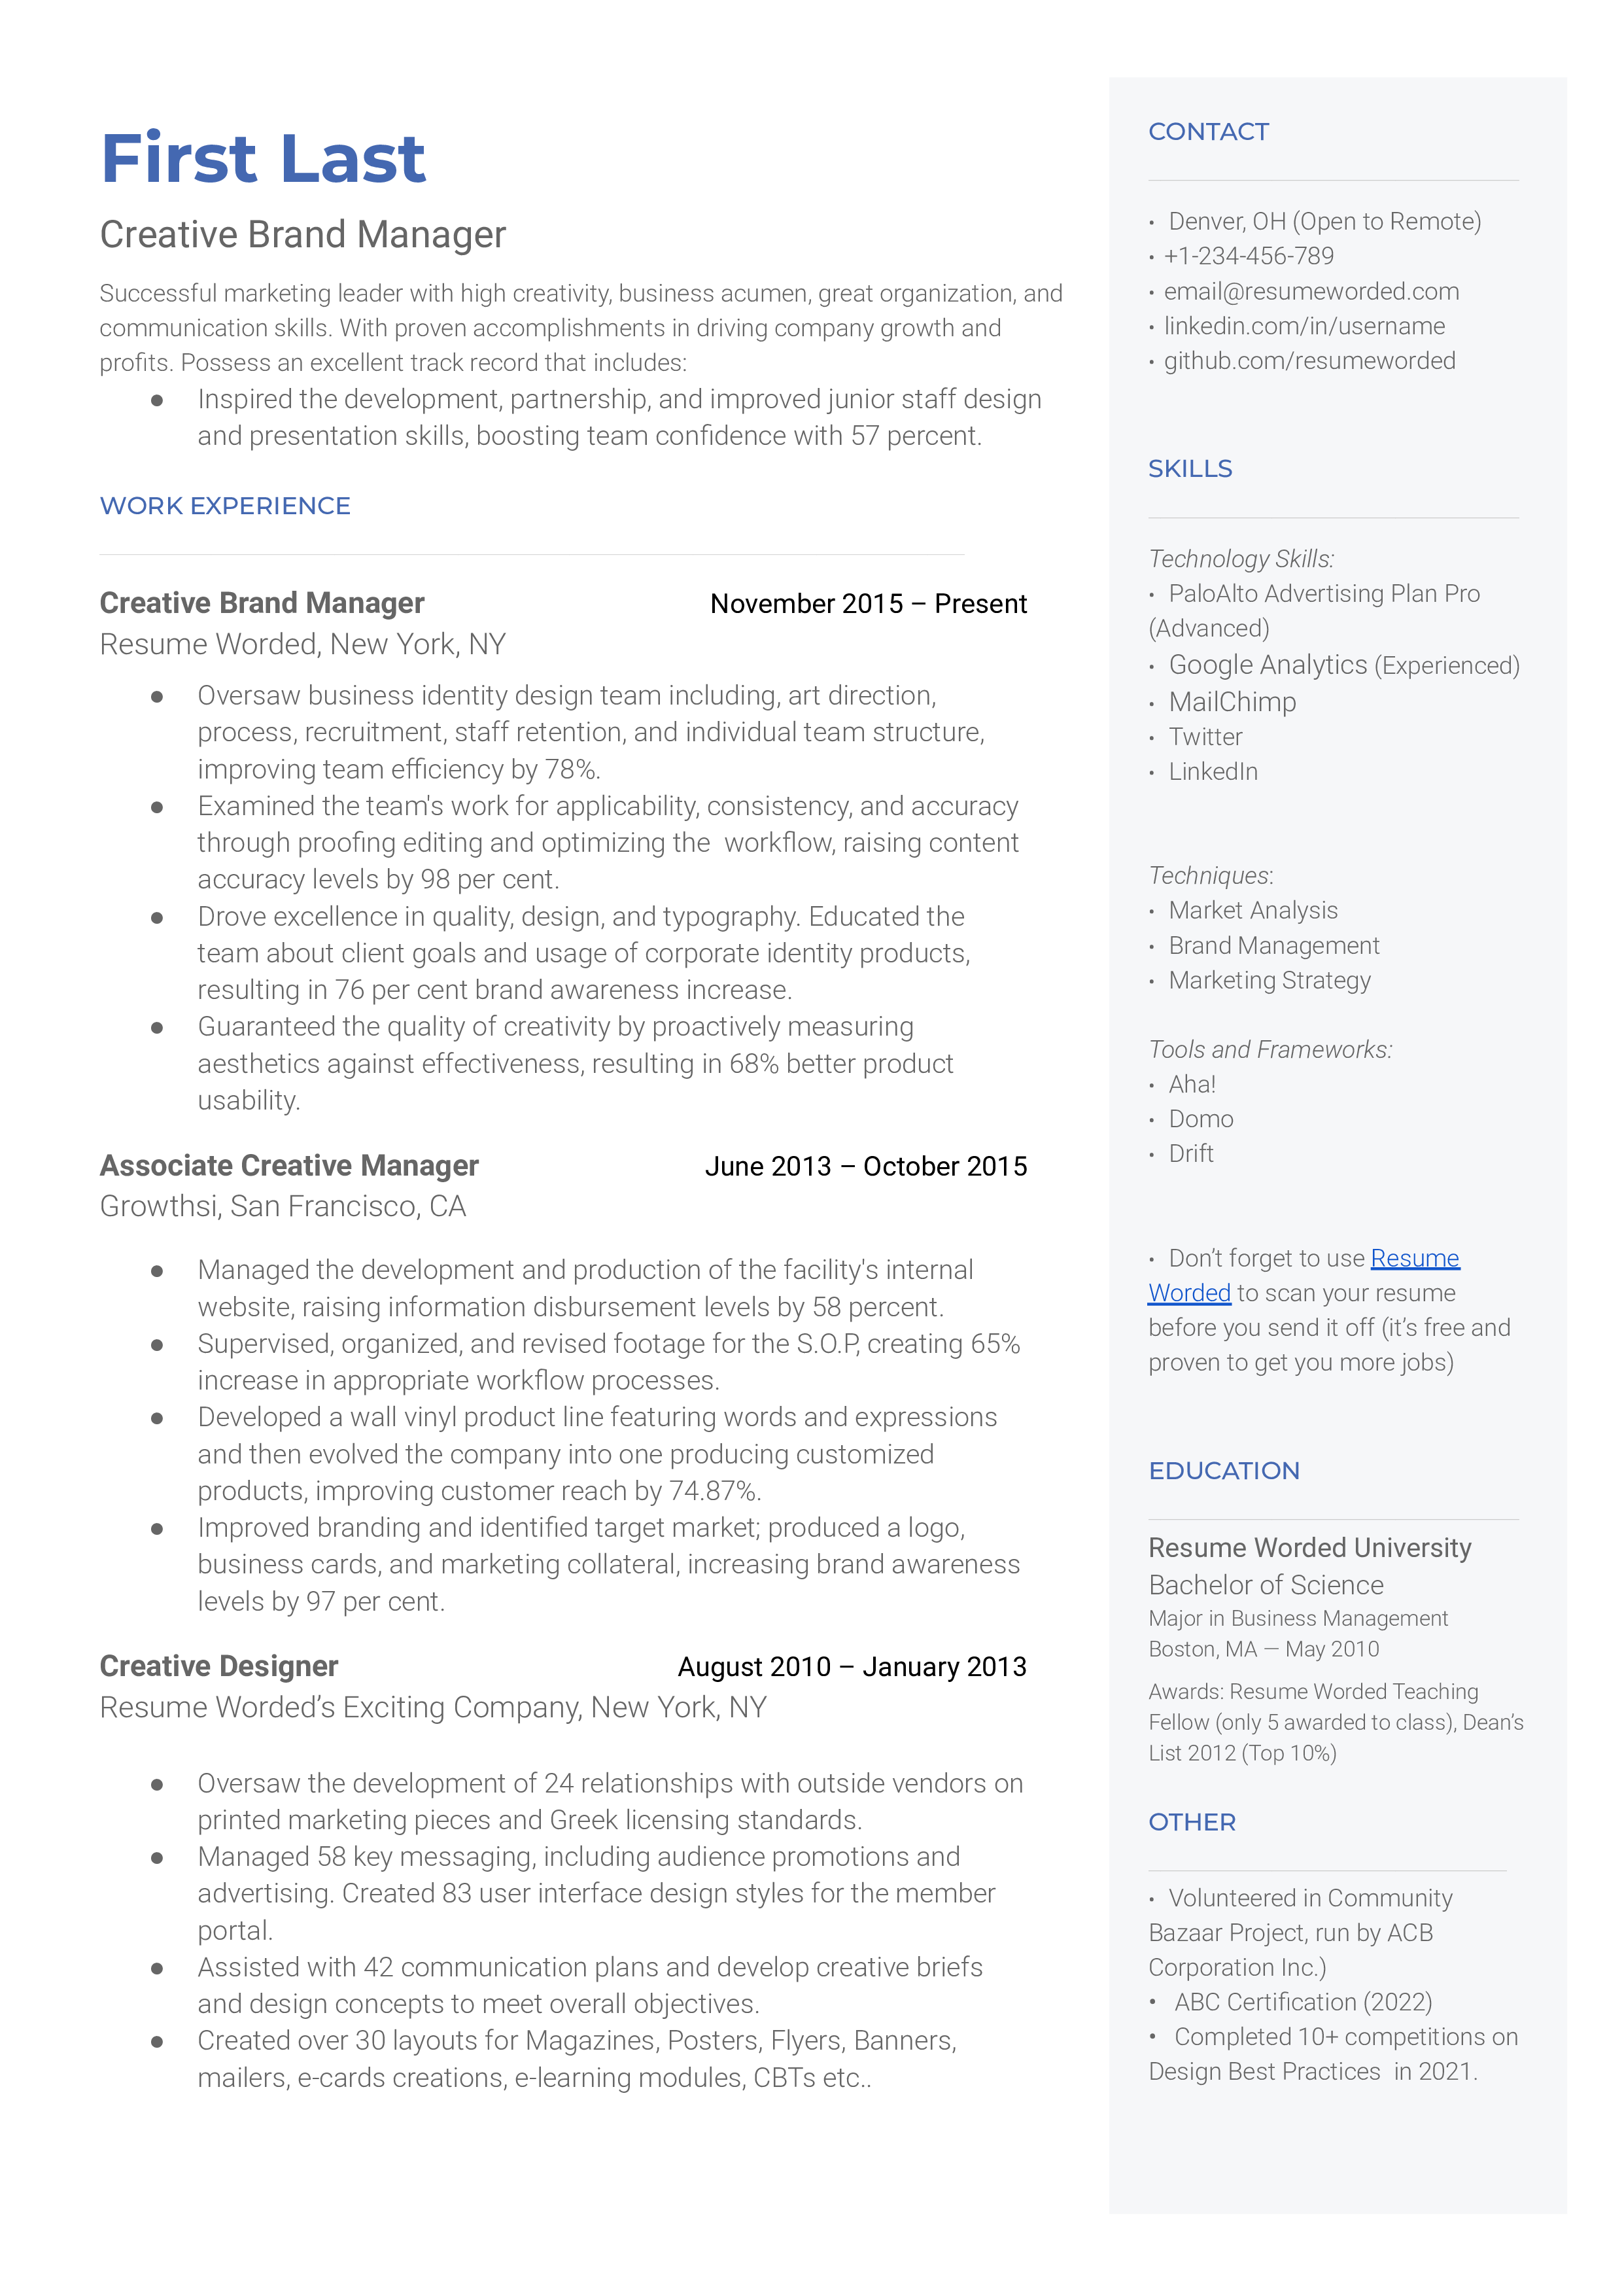 A resume for a creative brand manager with a BSN in business, and experience as a creative designer and associate creative manager.